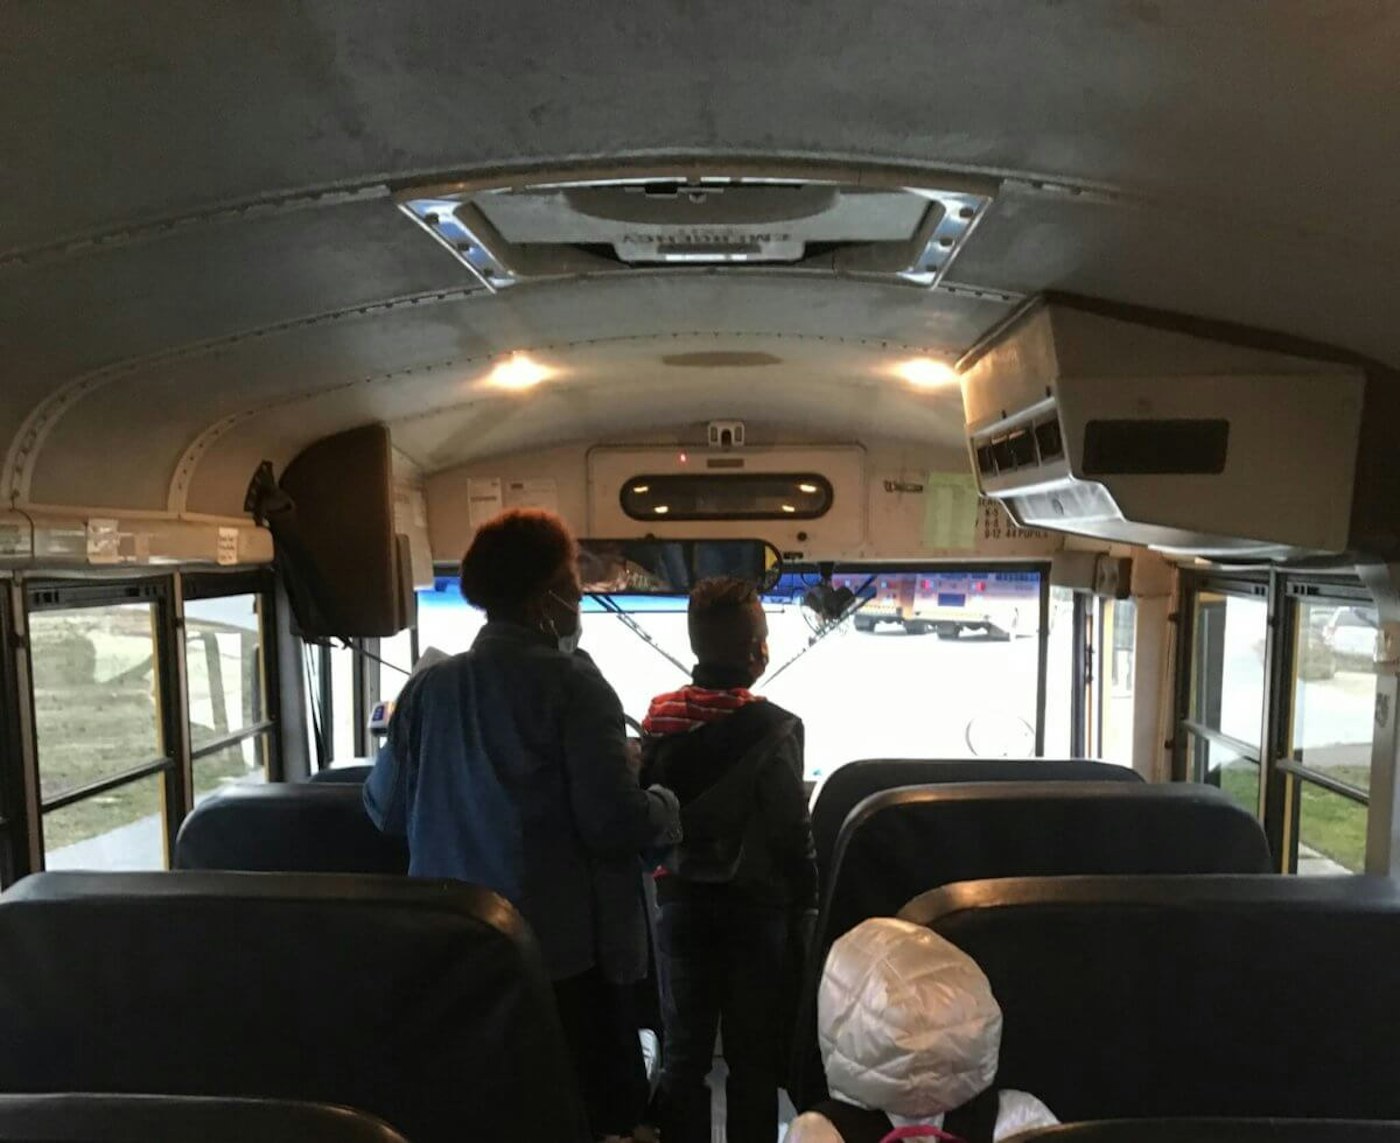 Students unload the bus on the first day of in-classroom learning in Halifax County, North Carolina on March 15, 2021. (Photo by Billy Ball)